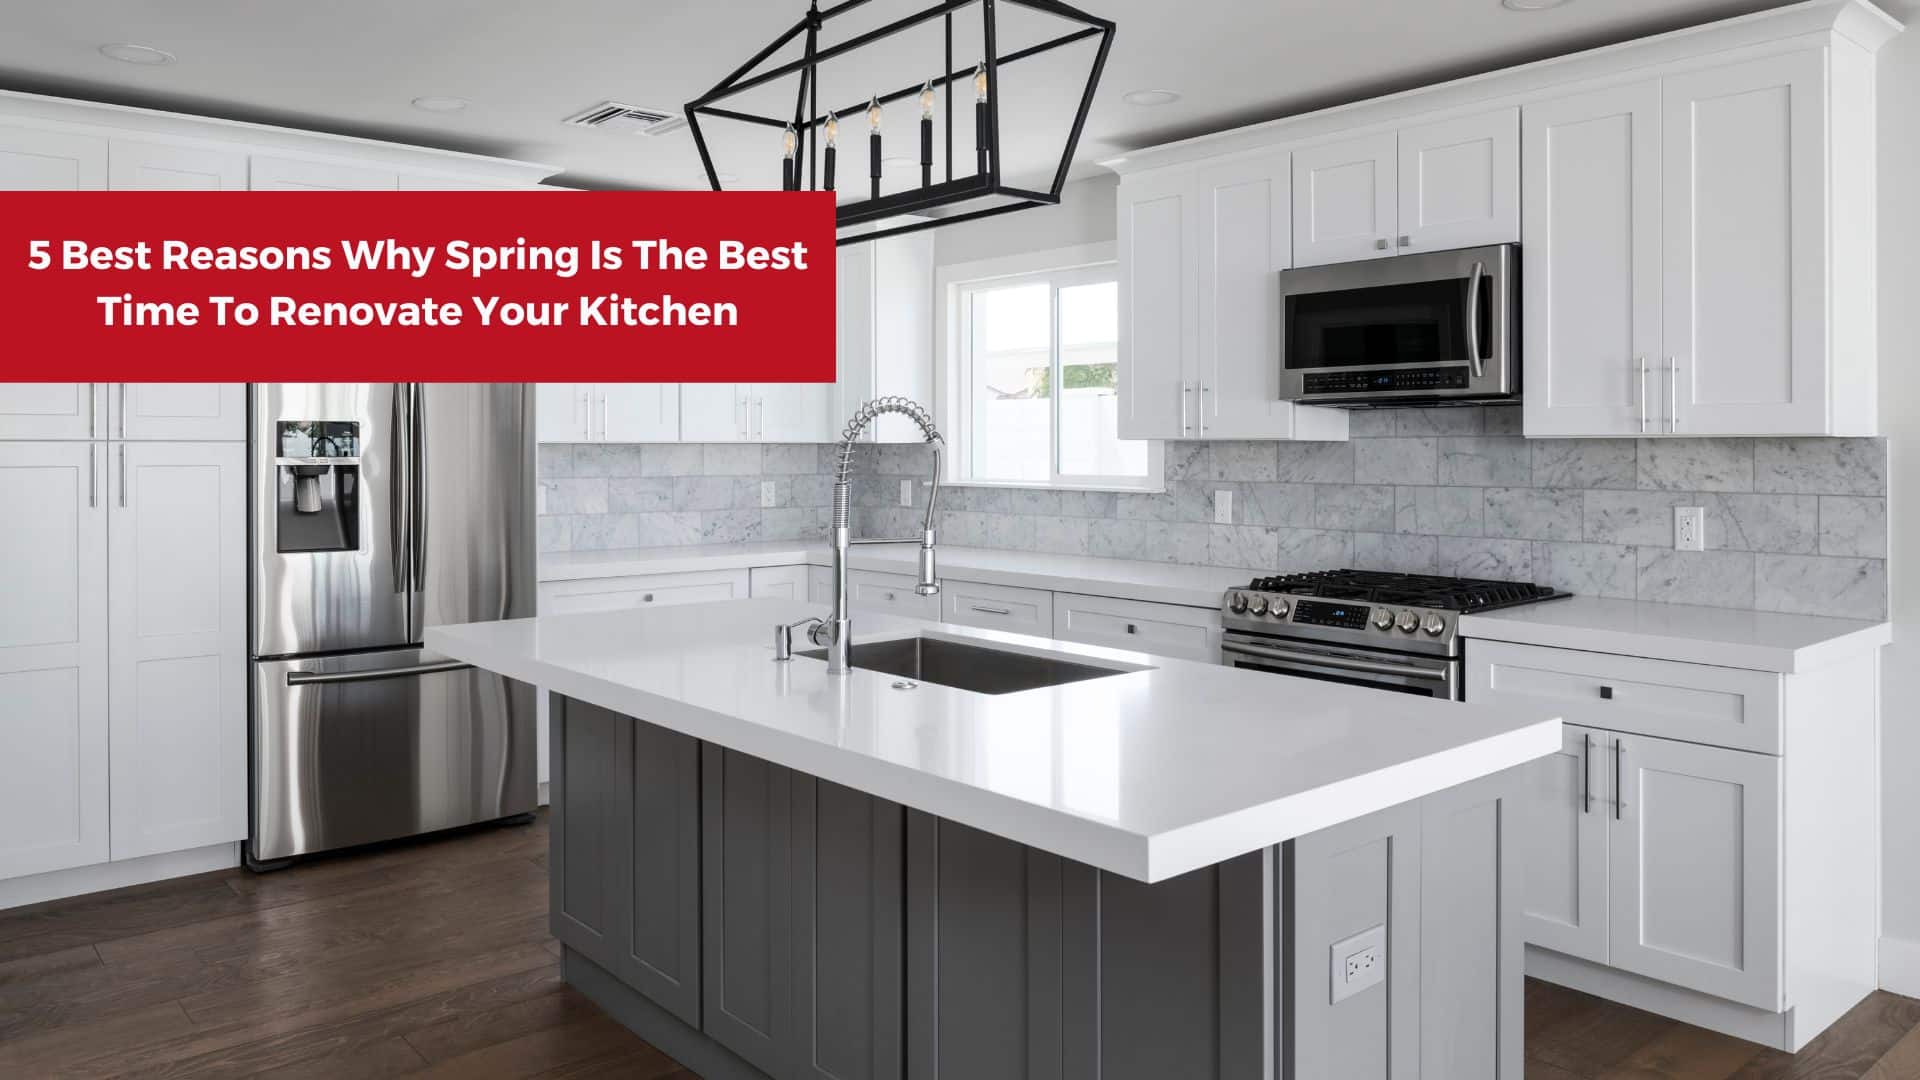 5 Best Reasons Why Spring Is The Best Time To Renovate Your Kitchen with white cabinets